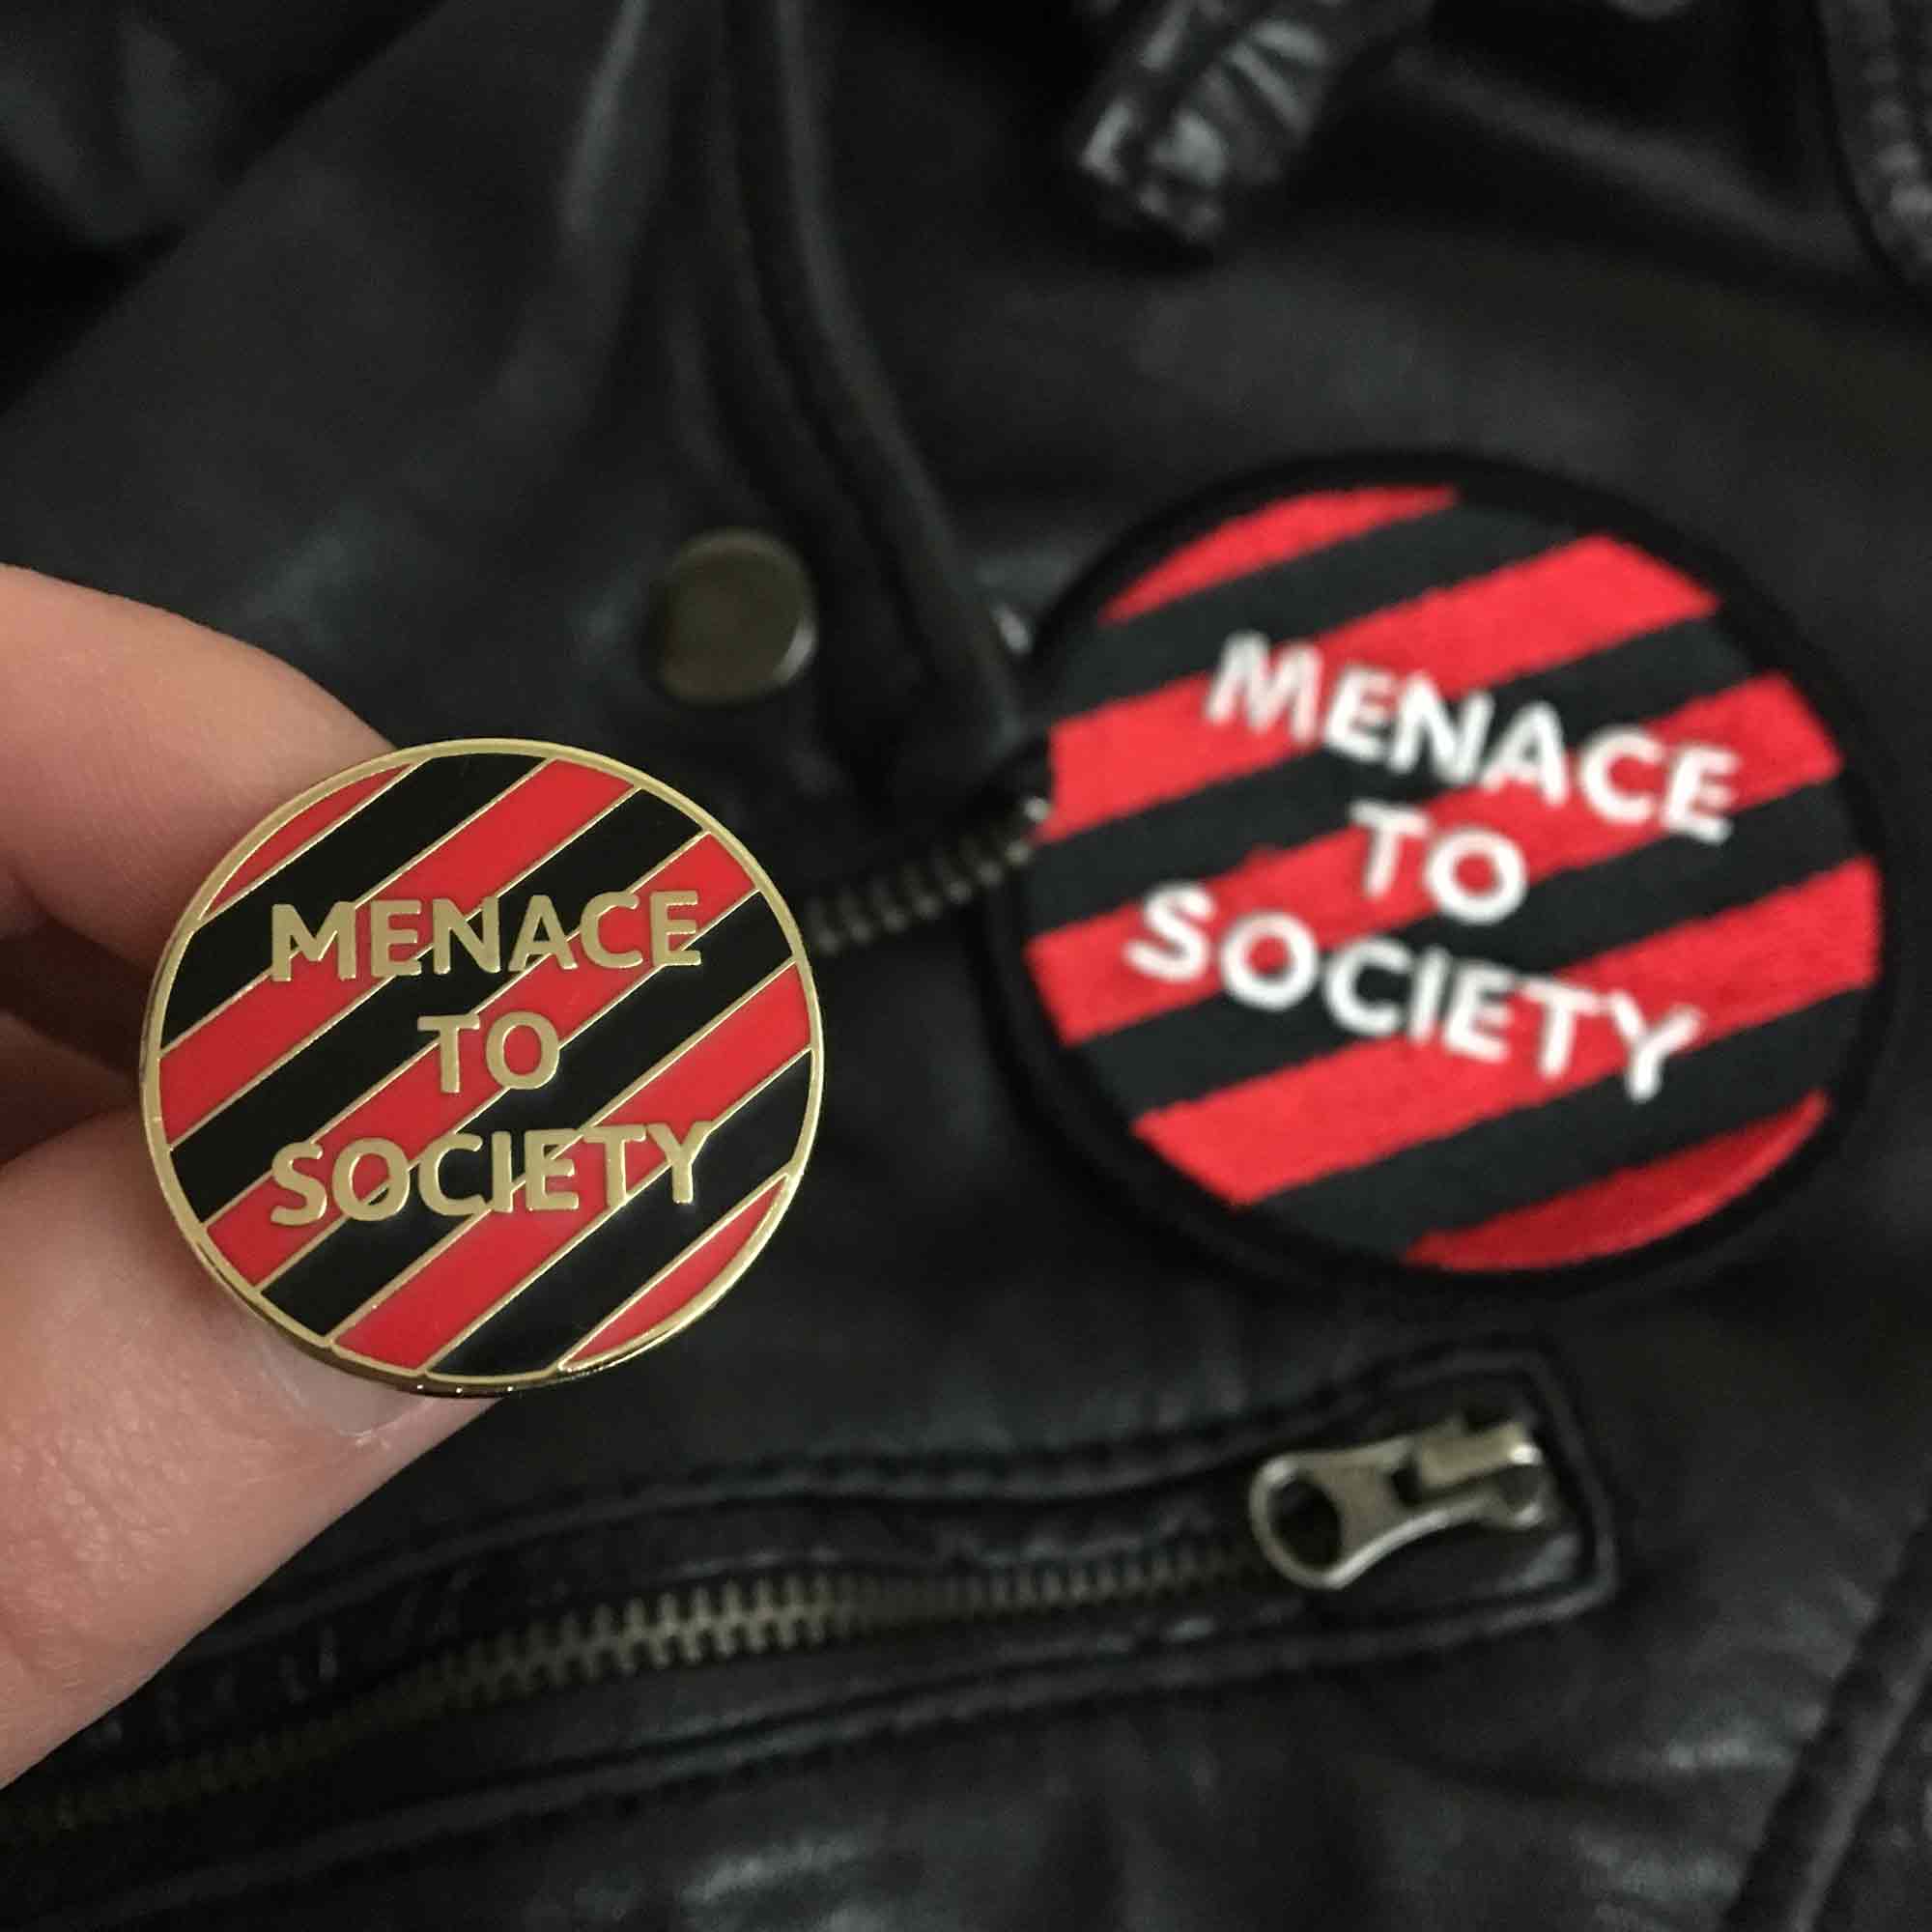 Menace-to-Society-lapel-pin-and-iron-on-patch-set-Cobalt-Hill.jpg